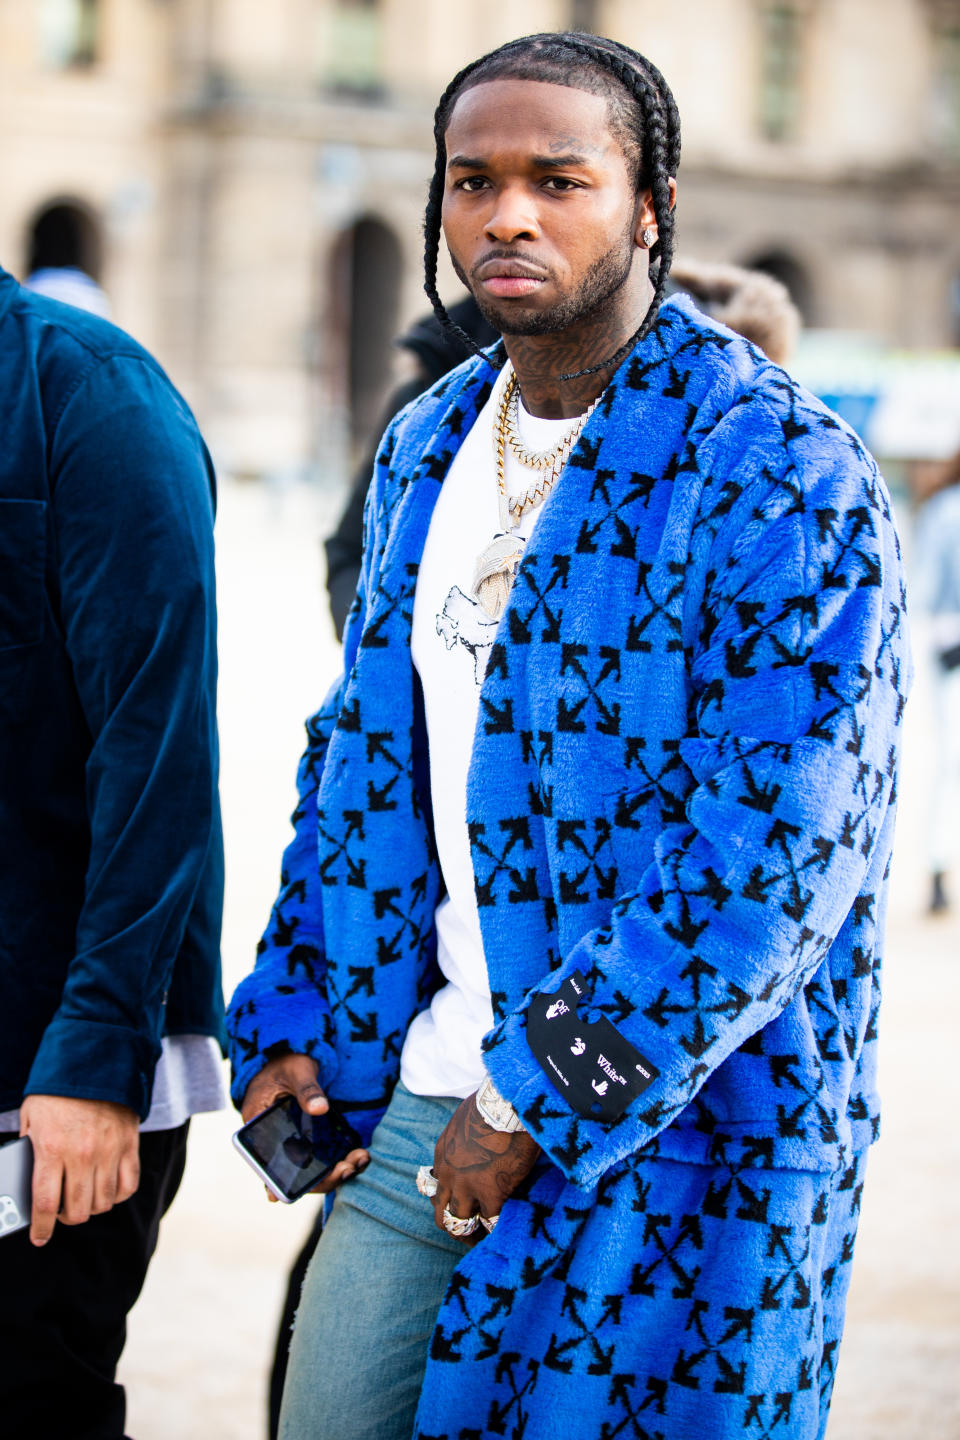 Rapper Pop Smoke pictured in January attending a fashion show in France. Source: Getty Images